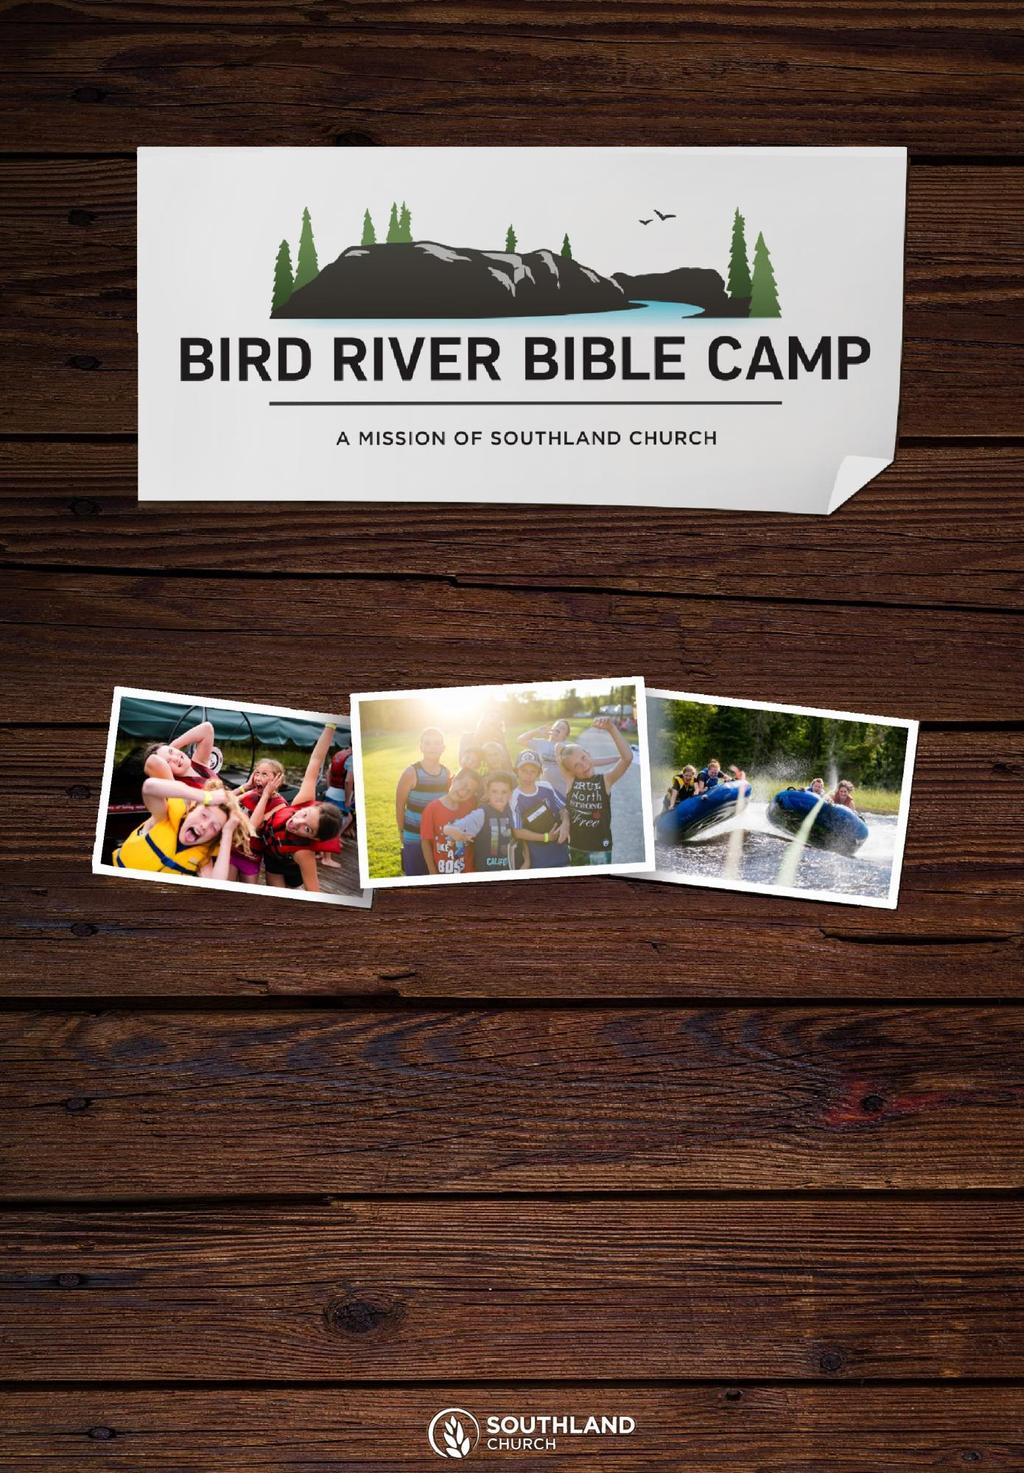 KIDS CAMP 2019 Welcome to Bird River Bible Camp! We are so excited that you are planning to attend Bird River Bible Camp this summer! BRBC is a Christian camp and a ministry of Southland Church.